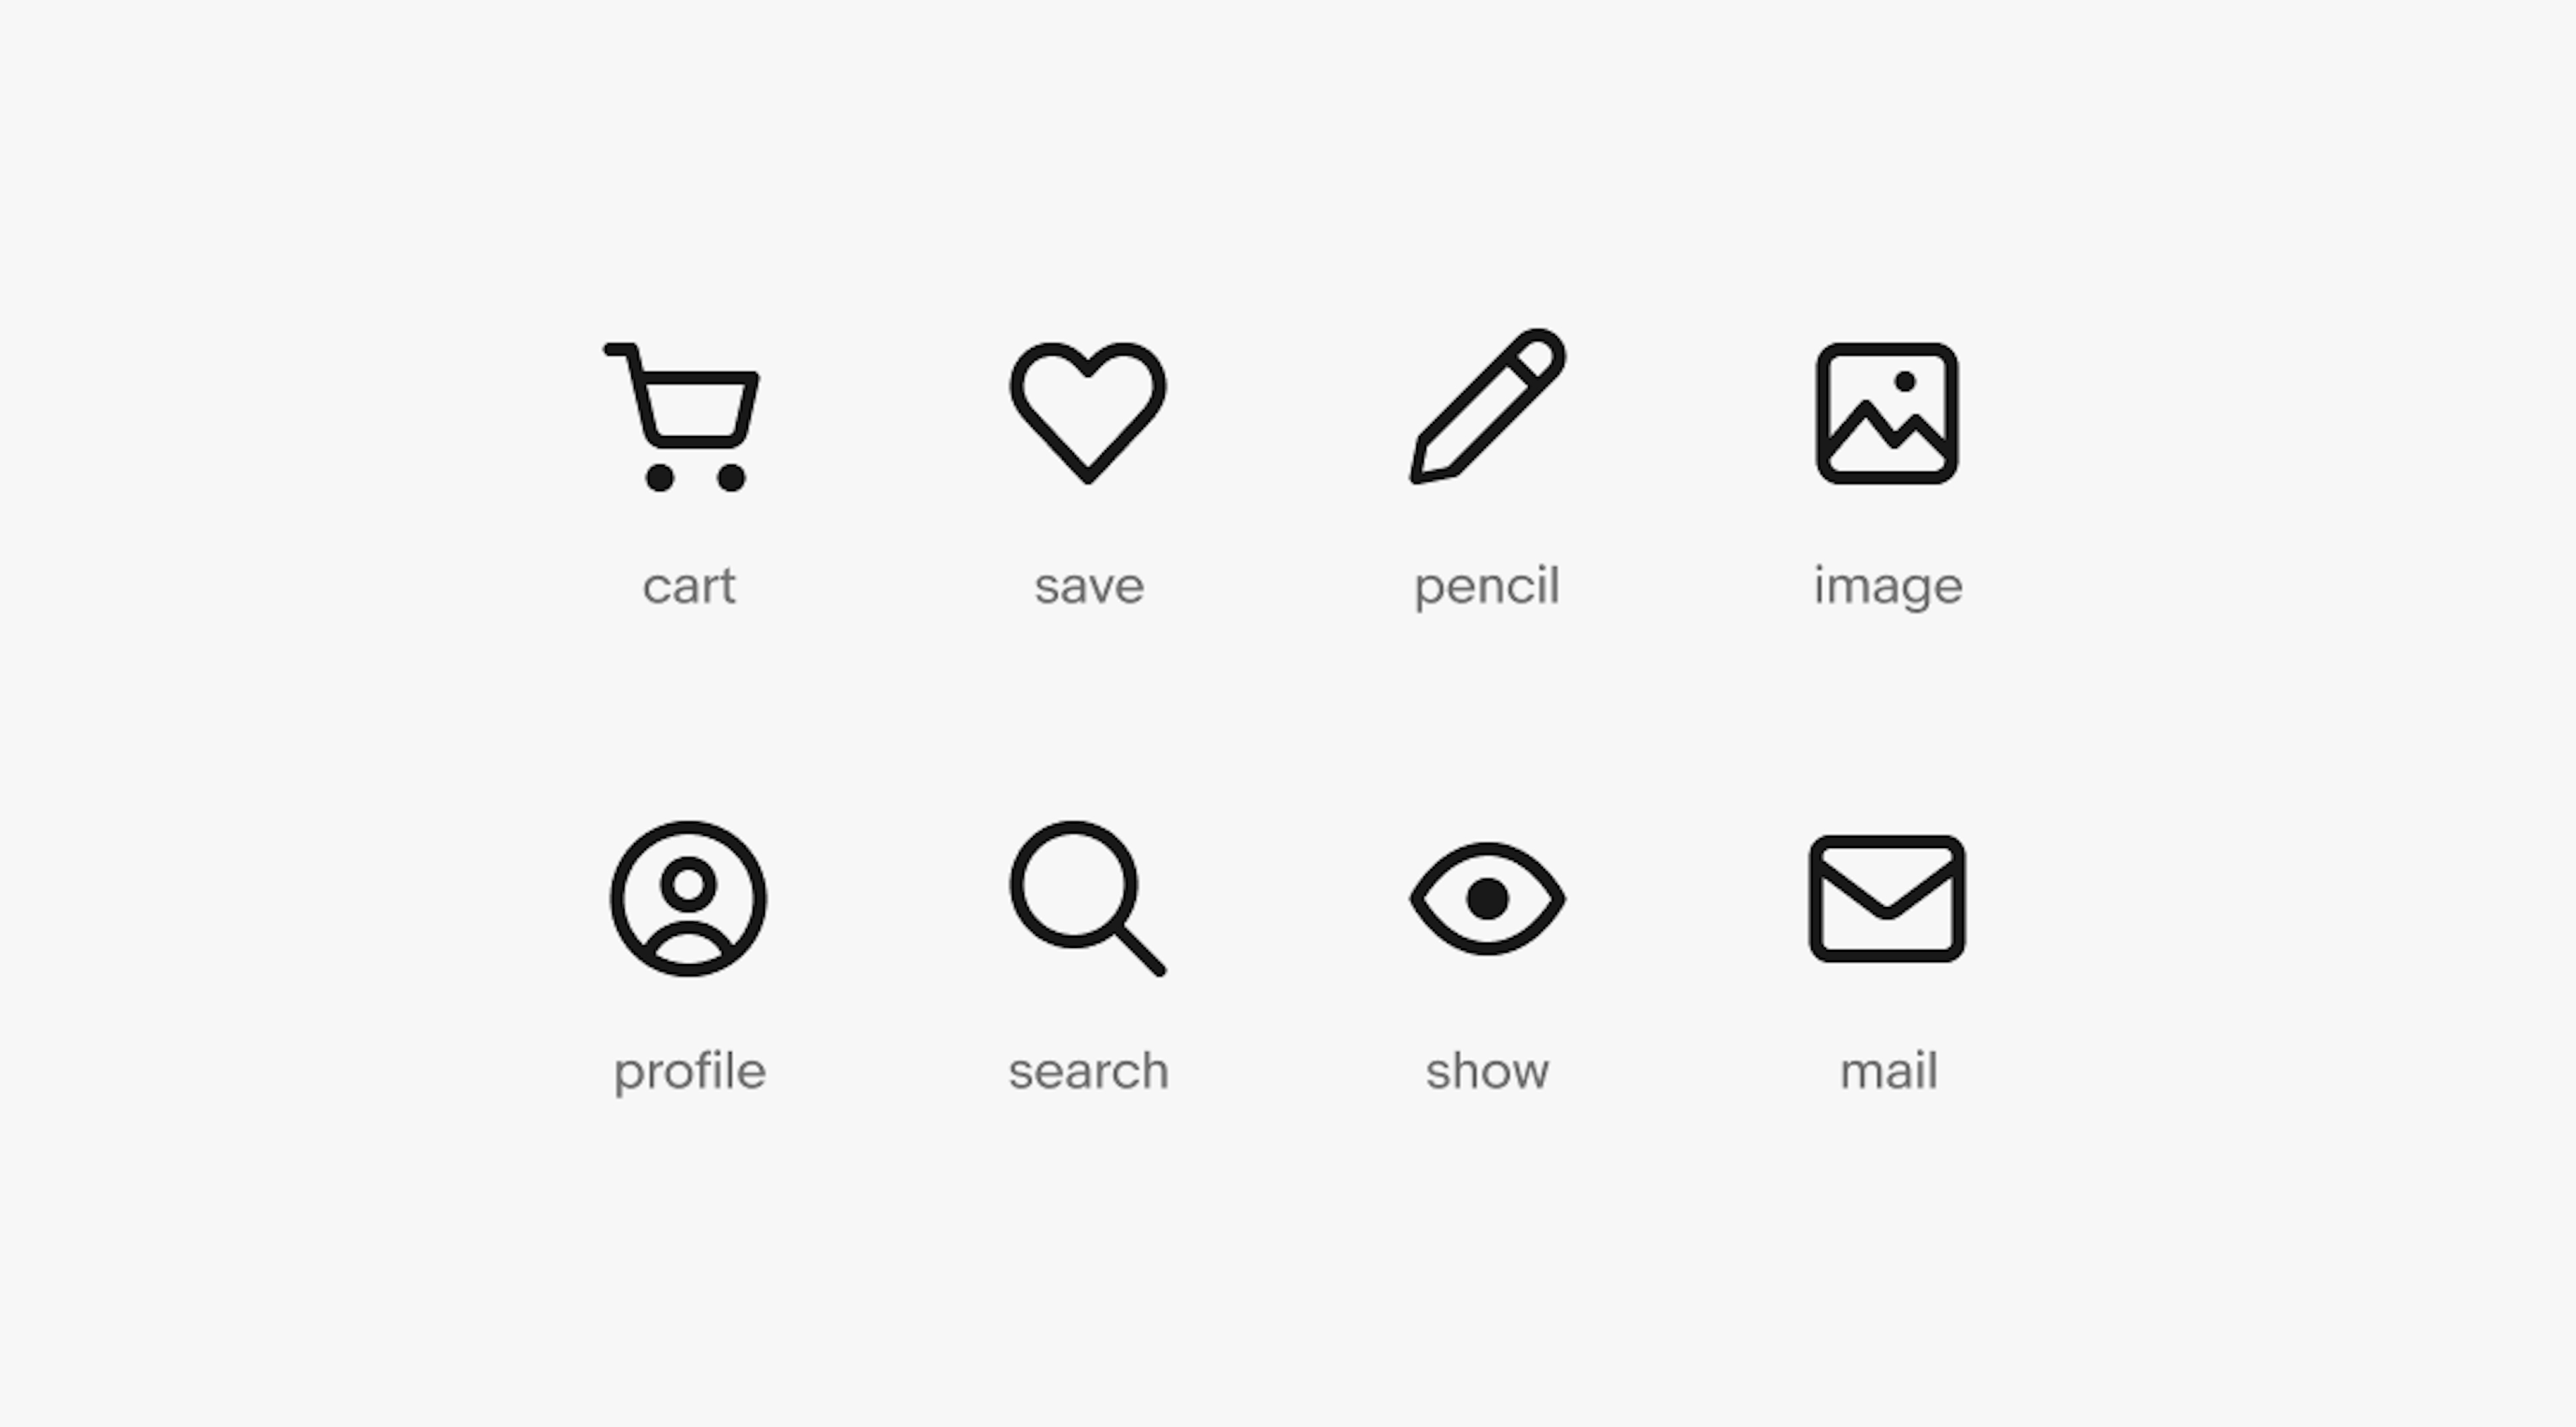 Two rows of icons. The top row includes cart, save, pencil, image. Cart is represented by a shopping cart, save by a heart, pencil by a pencil, and image by a nature landscape graphic in a square. The bottom row includes profile, search, show, mail. Profile is represented by an avatar, search by a magnifying glass, show by an open eye, and mail by an envelope.